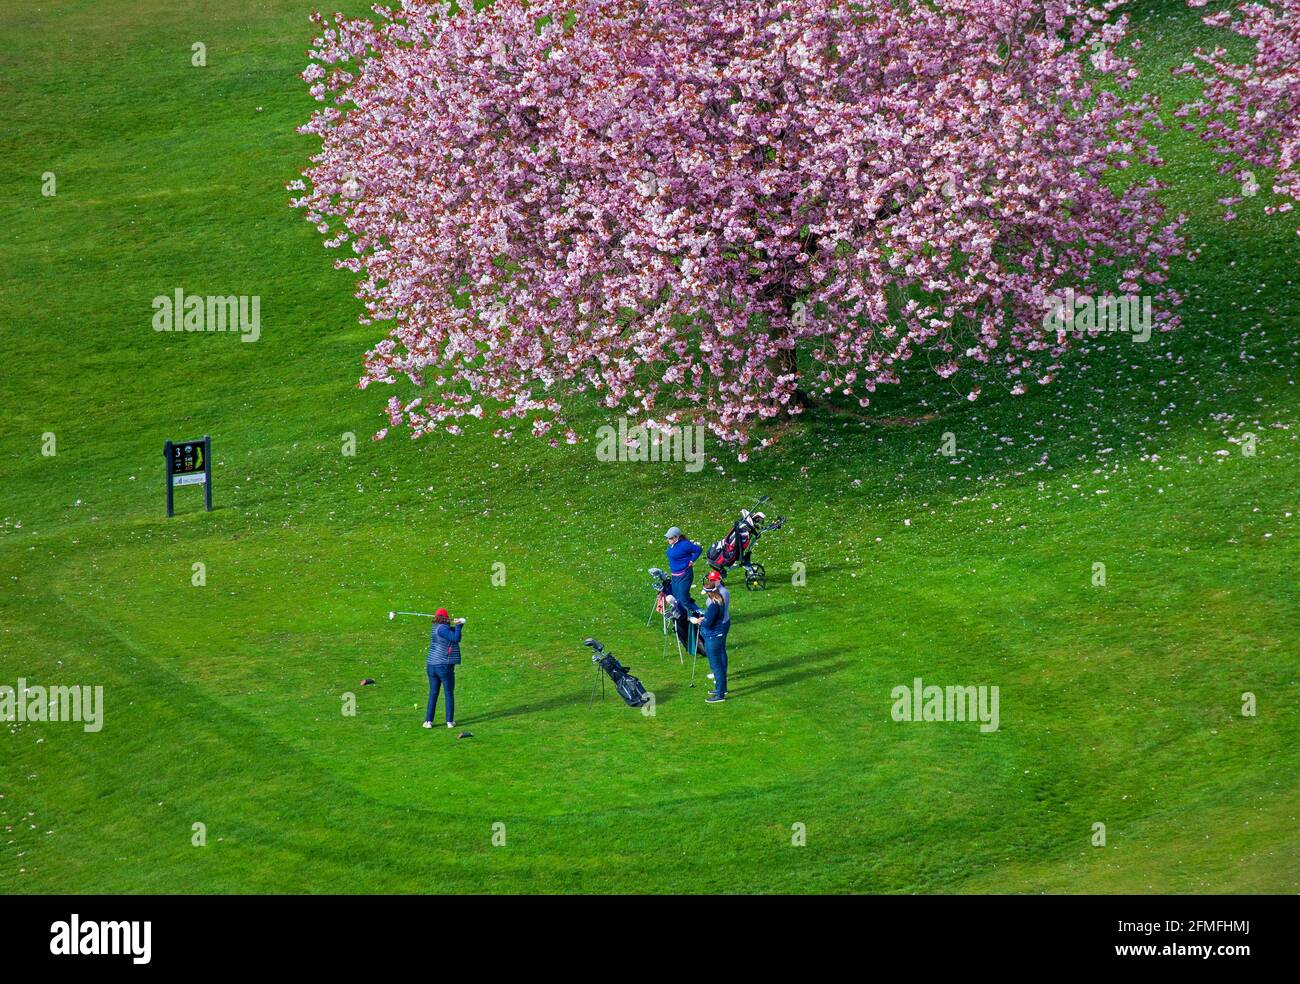 Edinburgh, Scotland, UK weather. 9th May 2021. Cloudy bright and milder at 11 degrees in Holyrood Park overlooking Prestonfield golf course. Pictured:group of ladies playing golf surrounded by a variety of pink blossom trees within the golf course. Credit: Arch White/Alamy Live News. Stock Photo